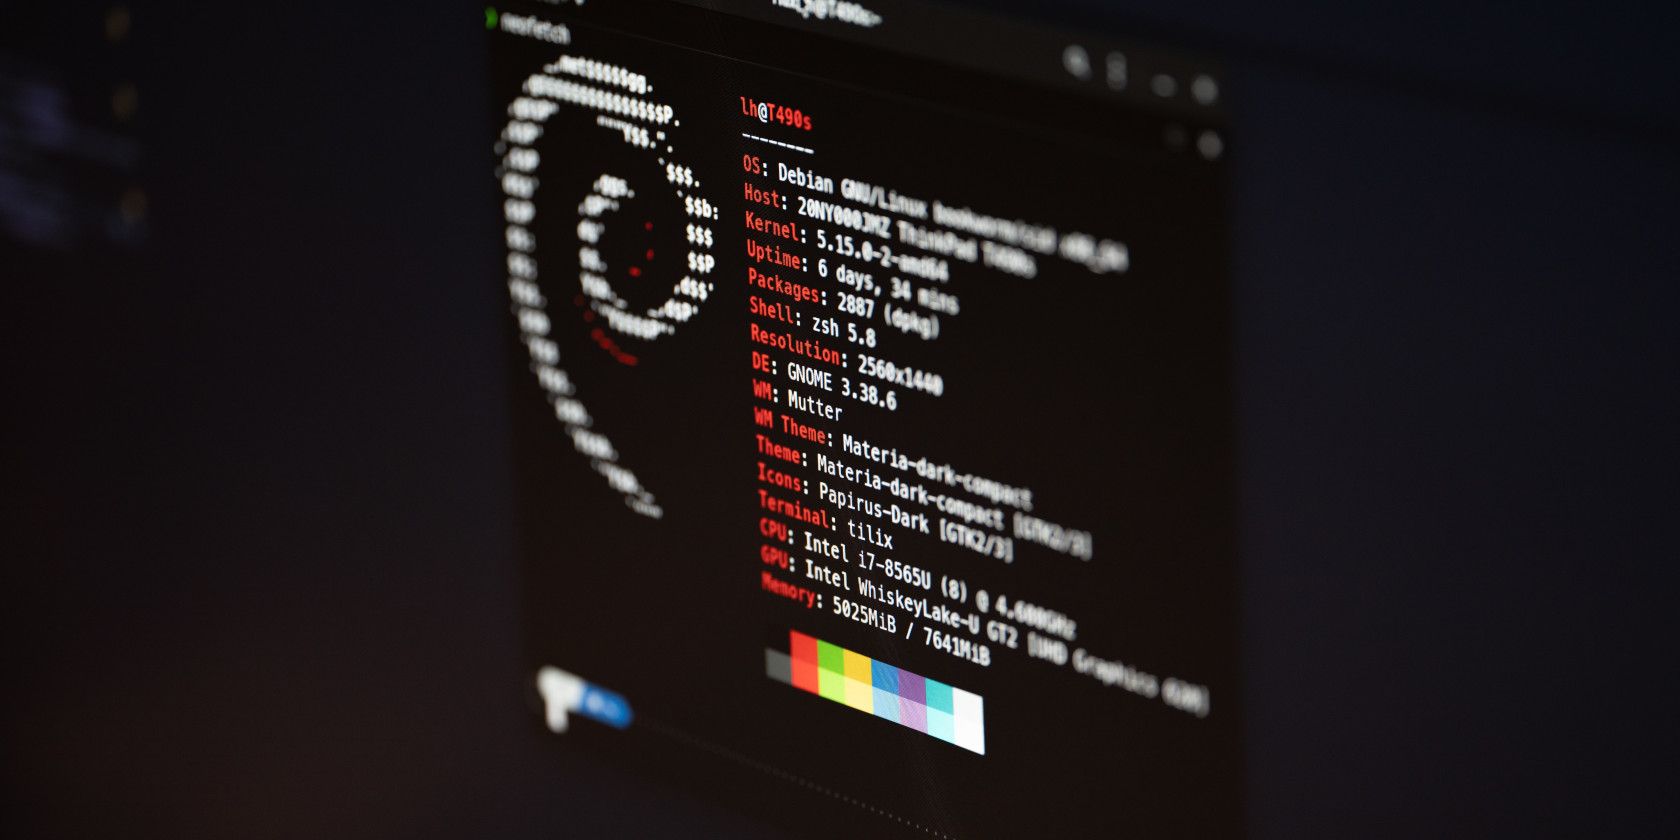 computer specs displayed in linux terminal